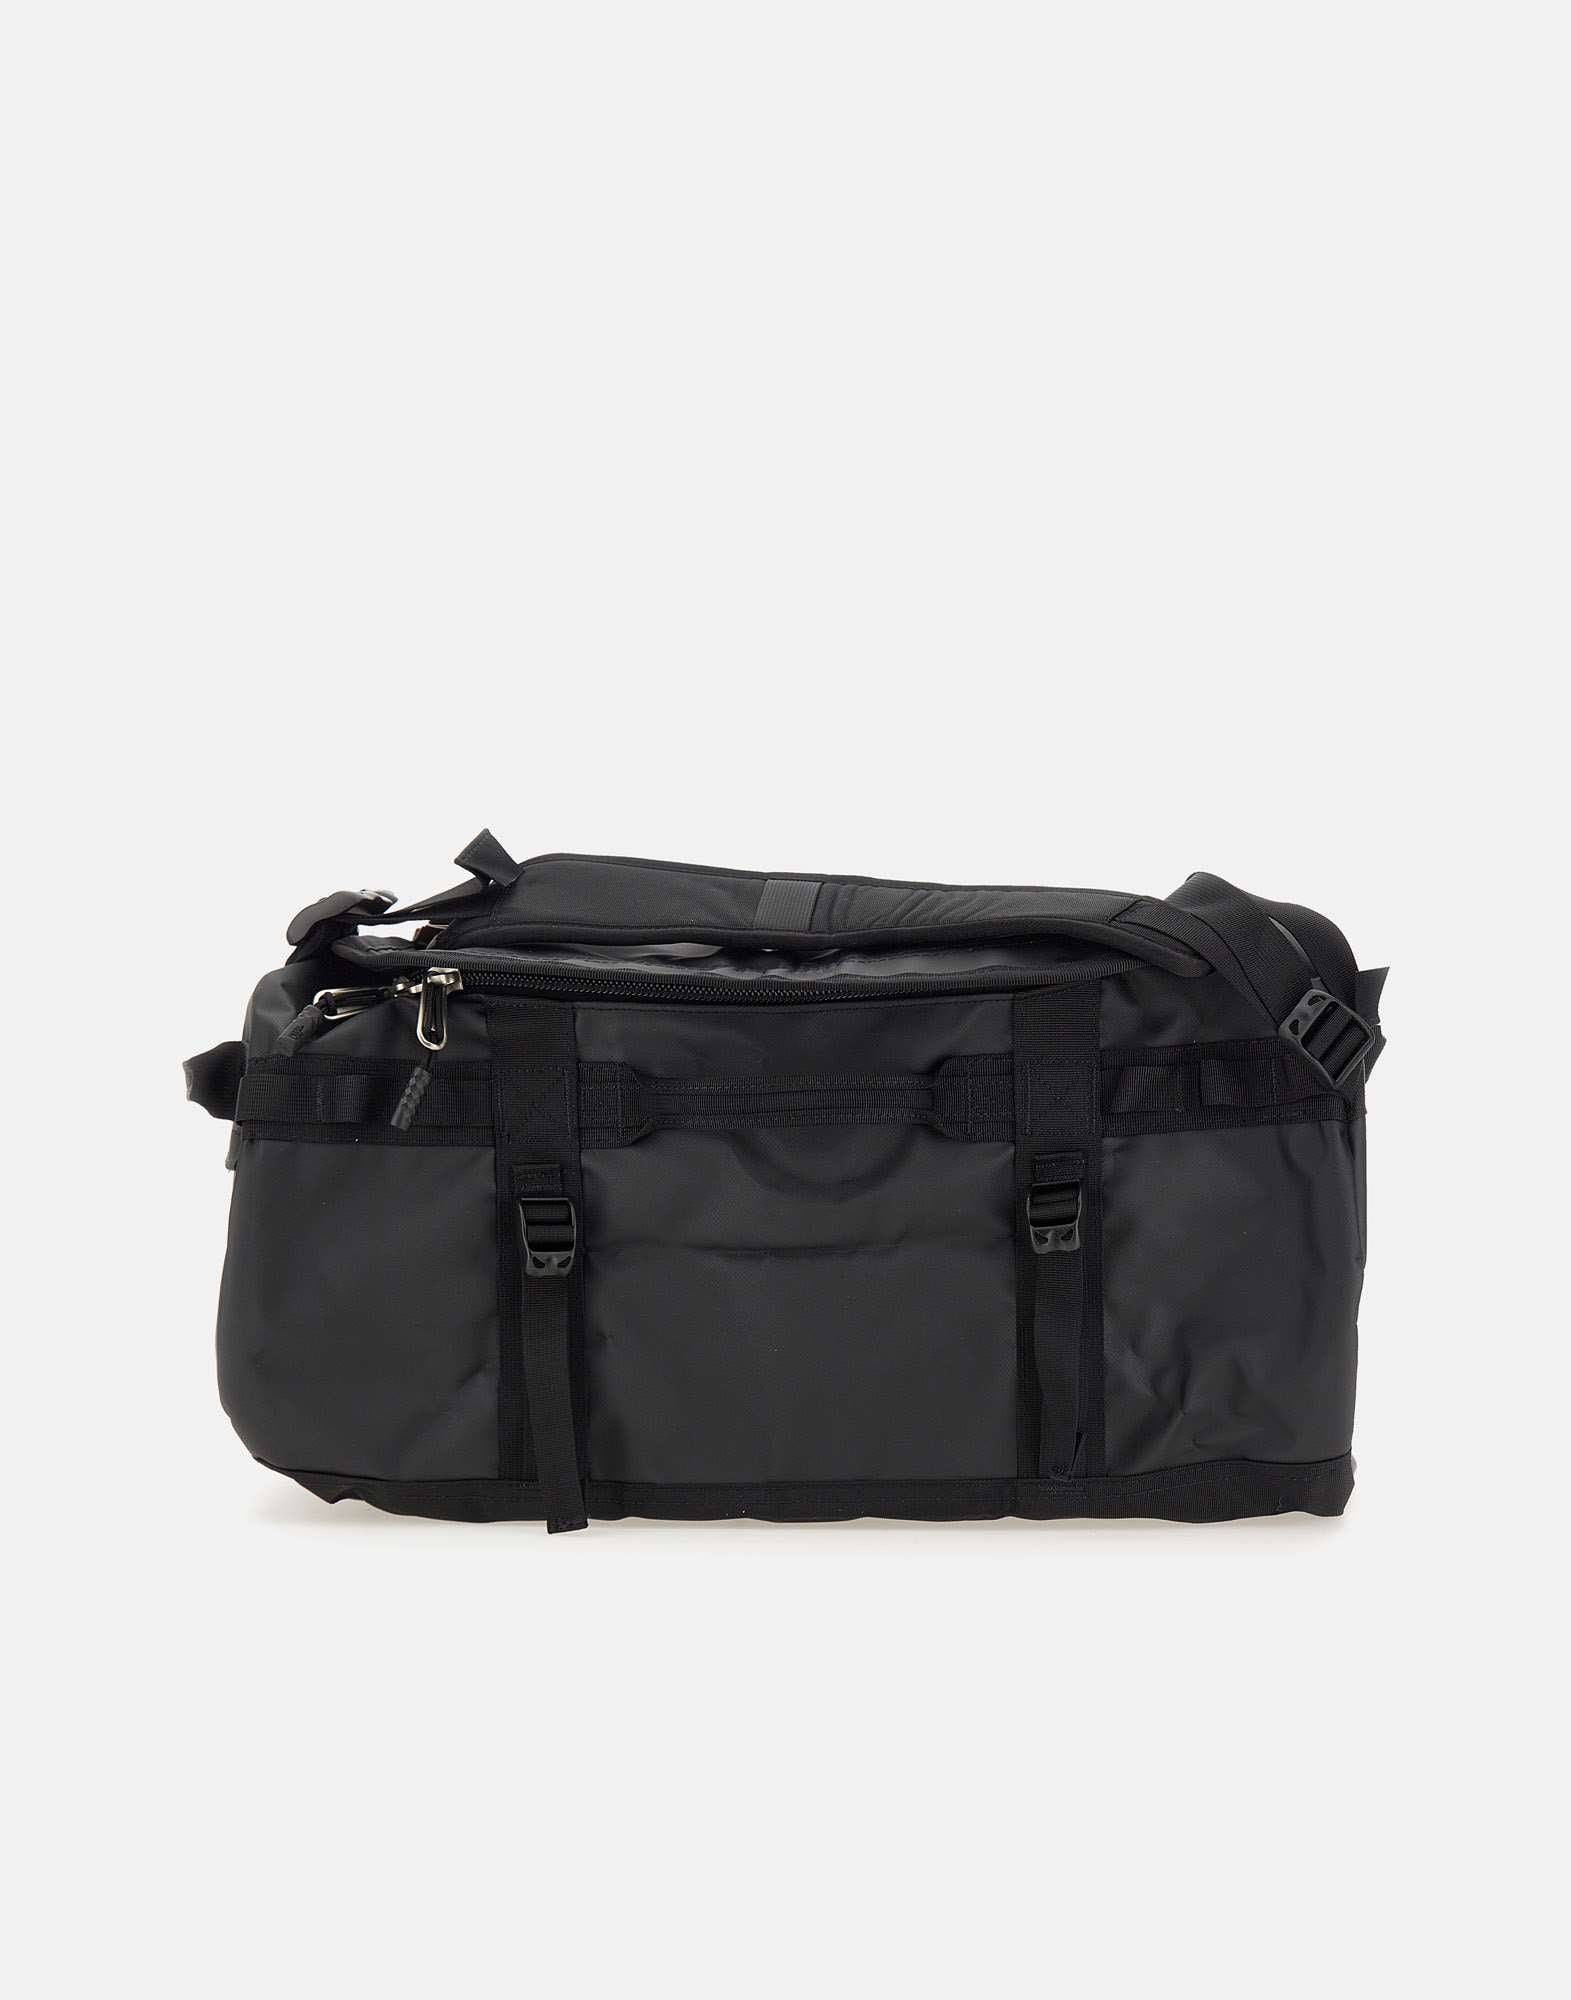 THE NORTH FACE NF0A52ST Man Black Suitcases - Zuklat